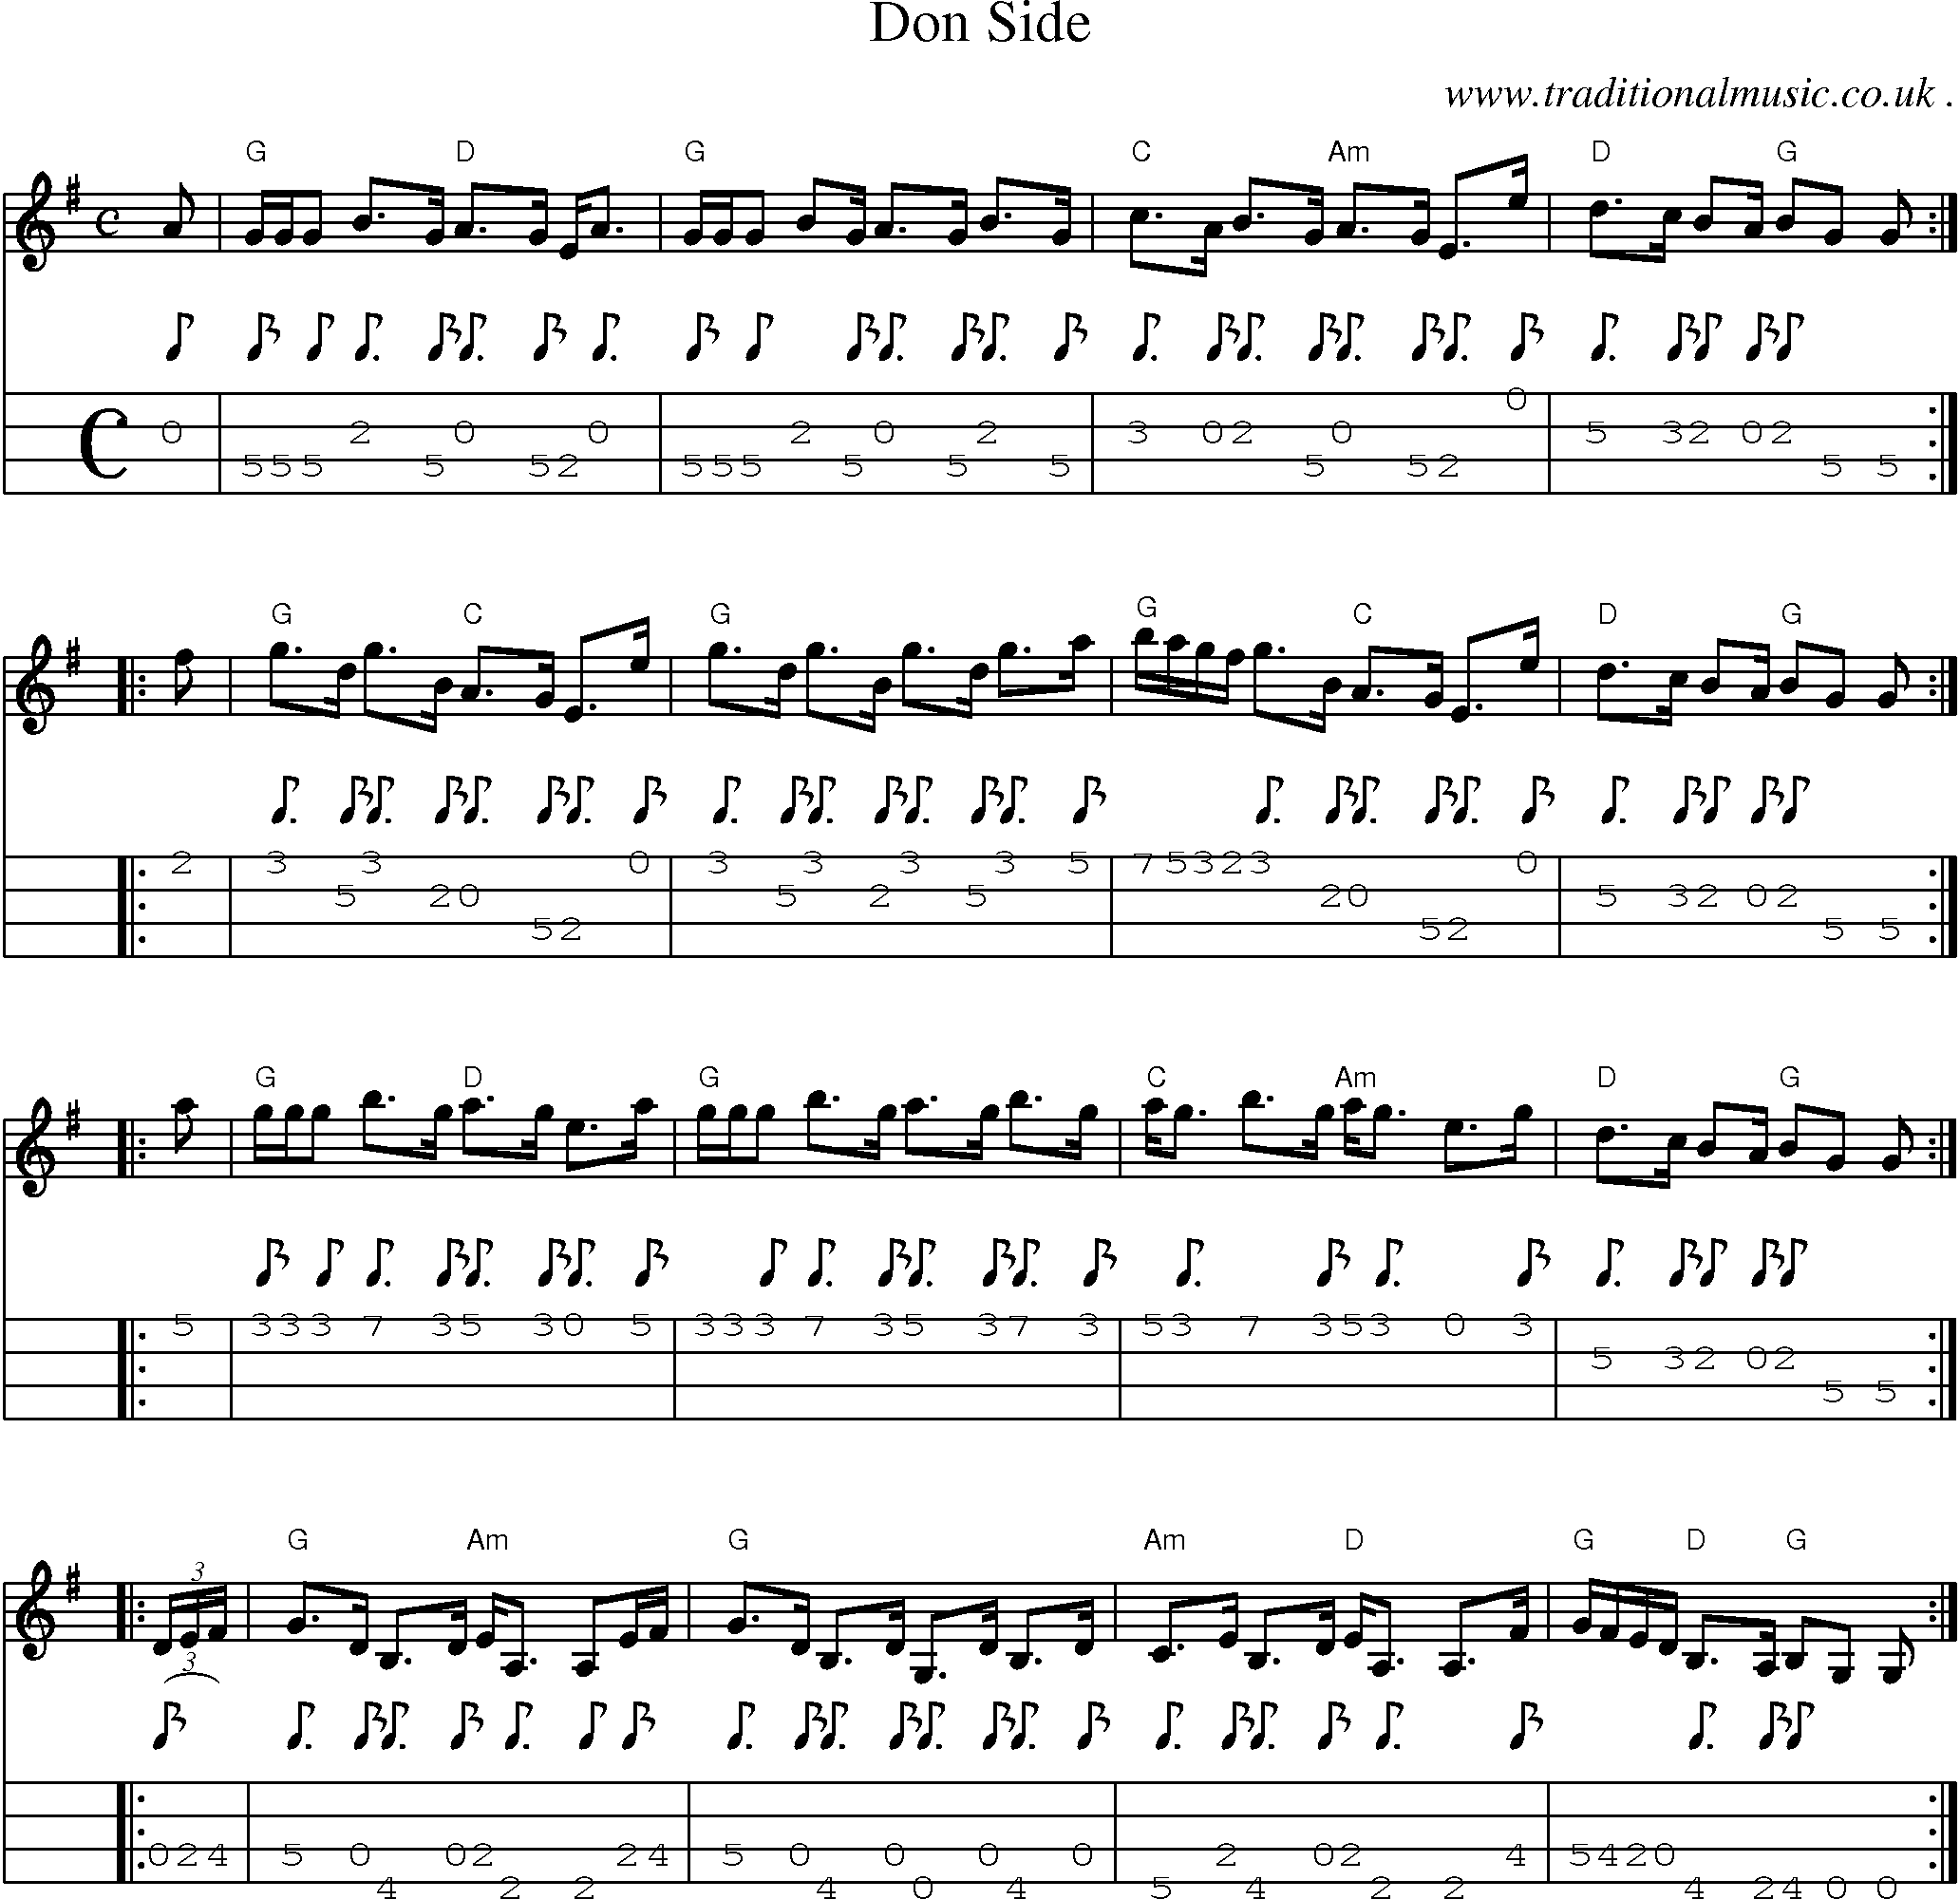 Sheet-music  score, Chords and Mandolin Tabs for Don Side